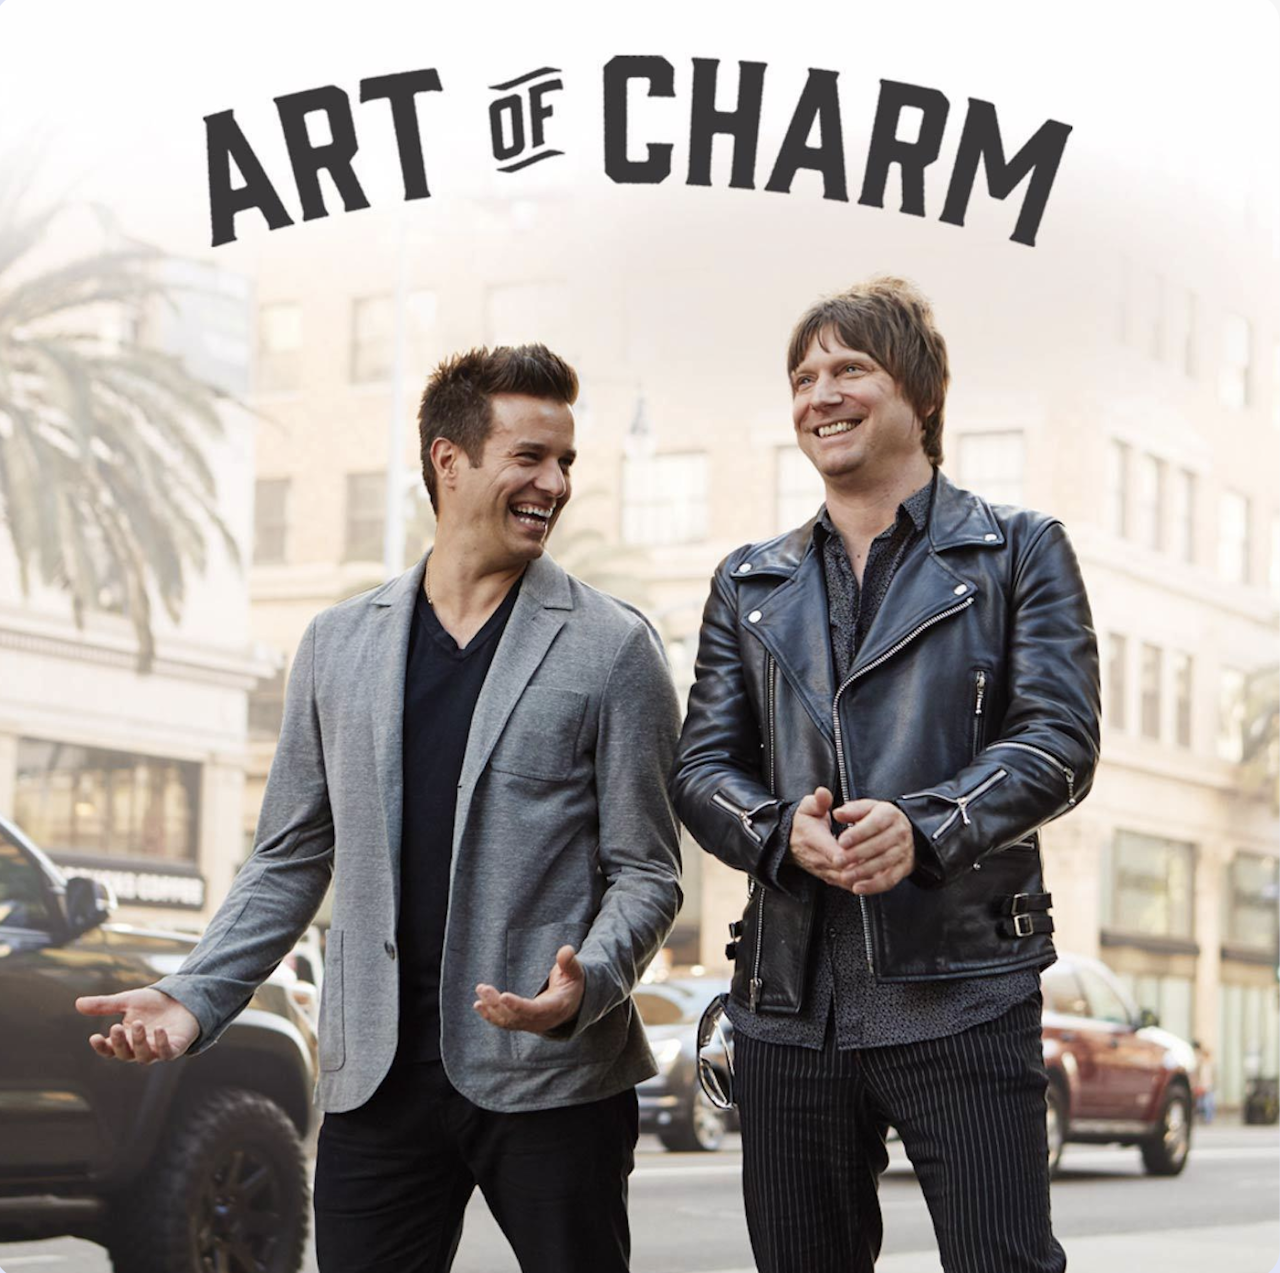 Best Sales Podcasts: The Art of Charm